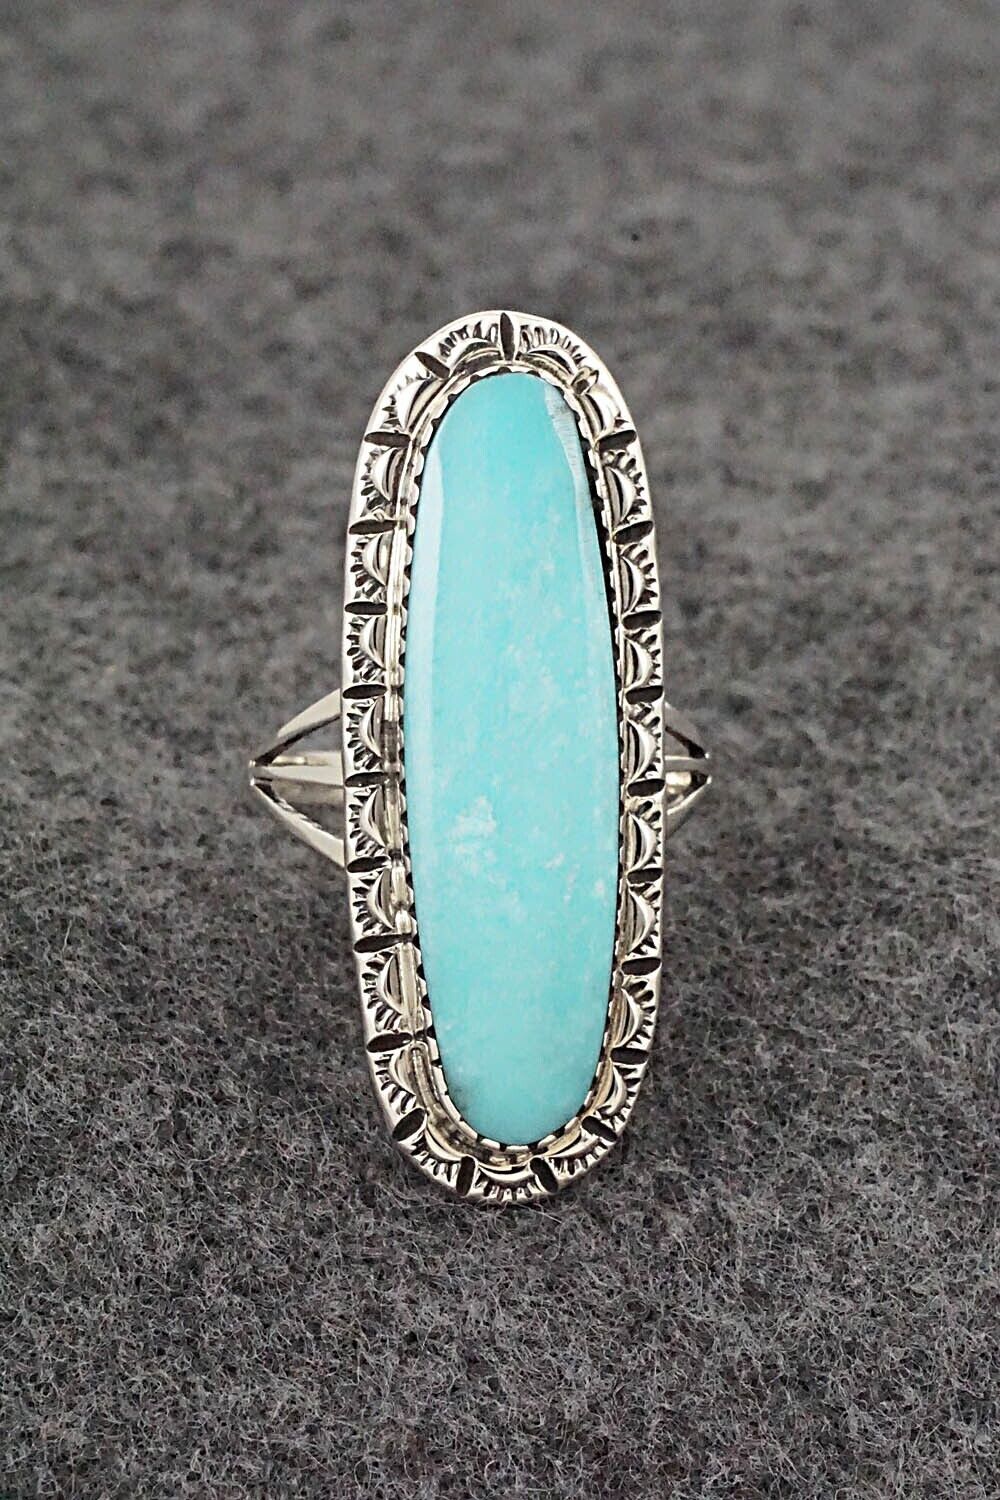 Turquoise & Sterling Silver Ring - Mike Smith - Size 8